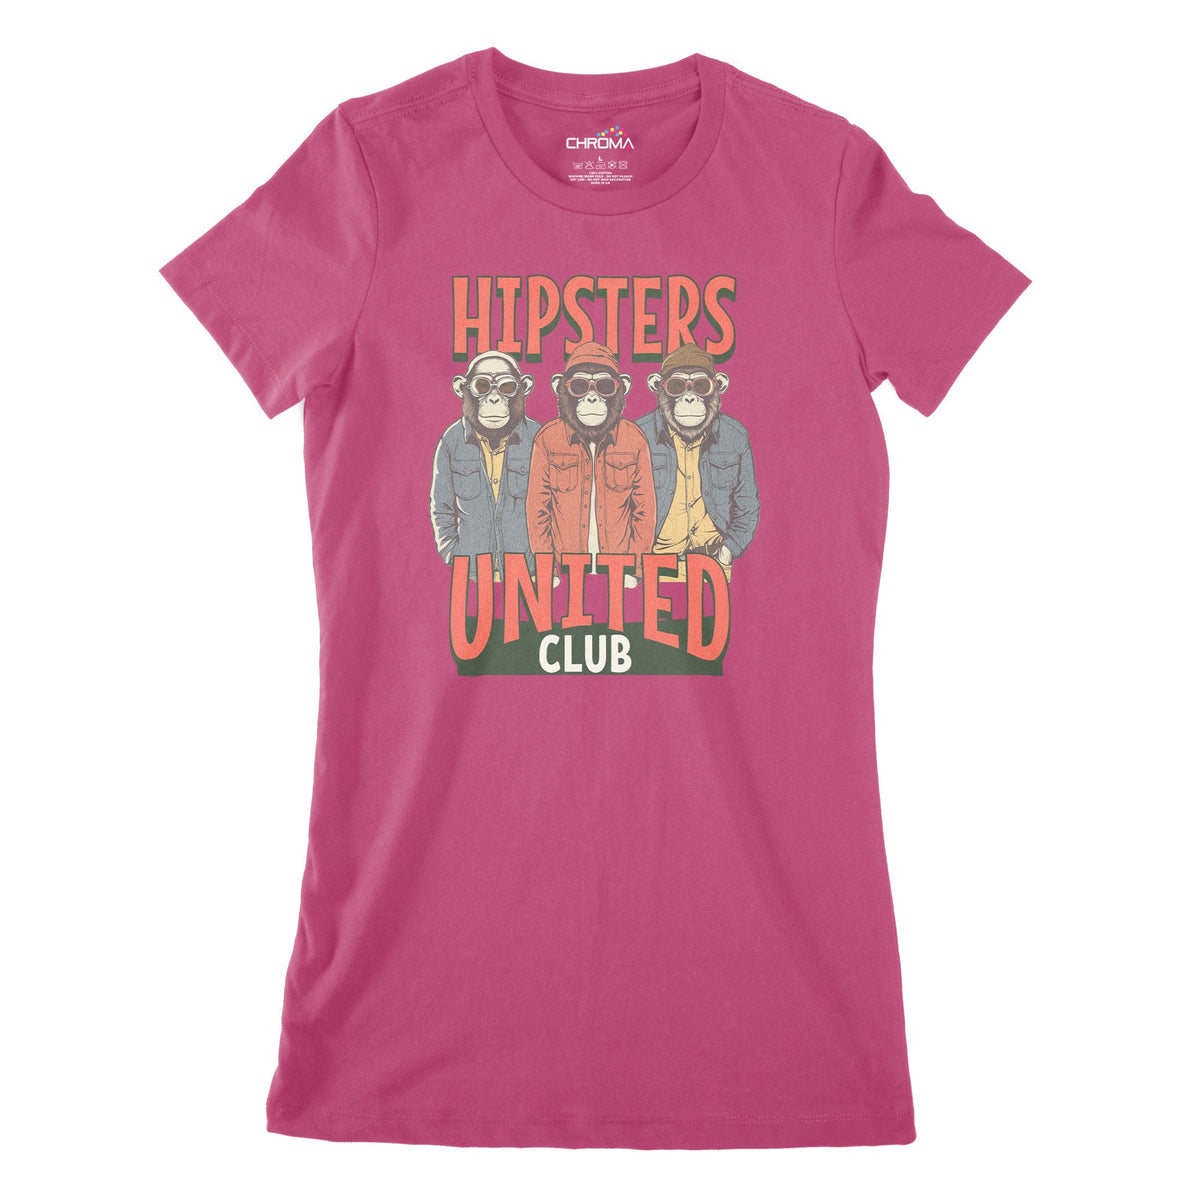 Hipsters United Club Women's Classic Fitted T-Shirt Chroma Clothing